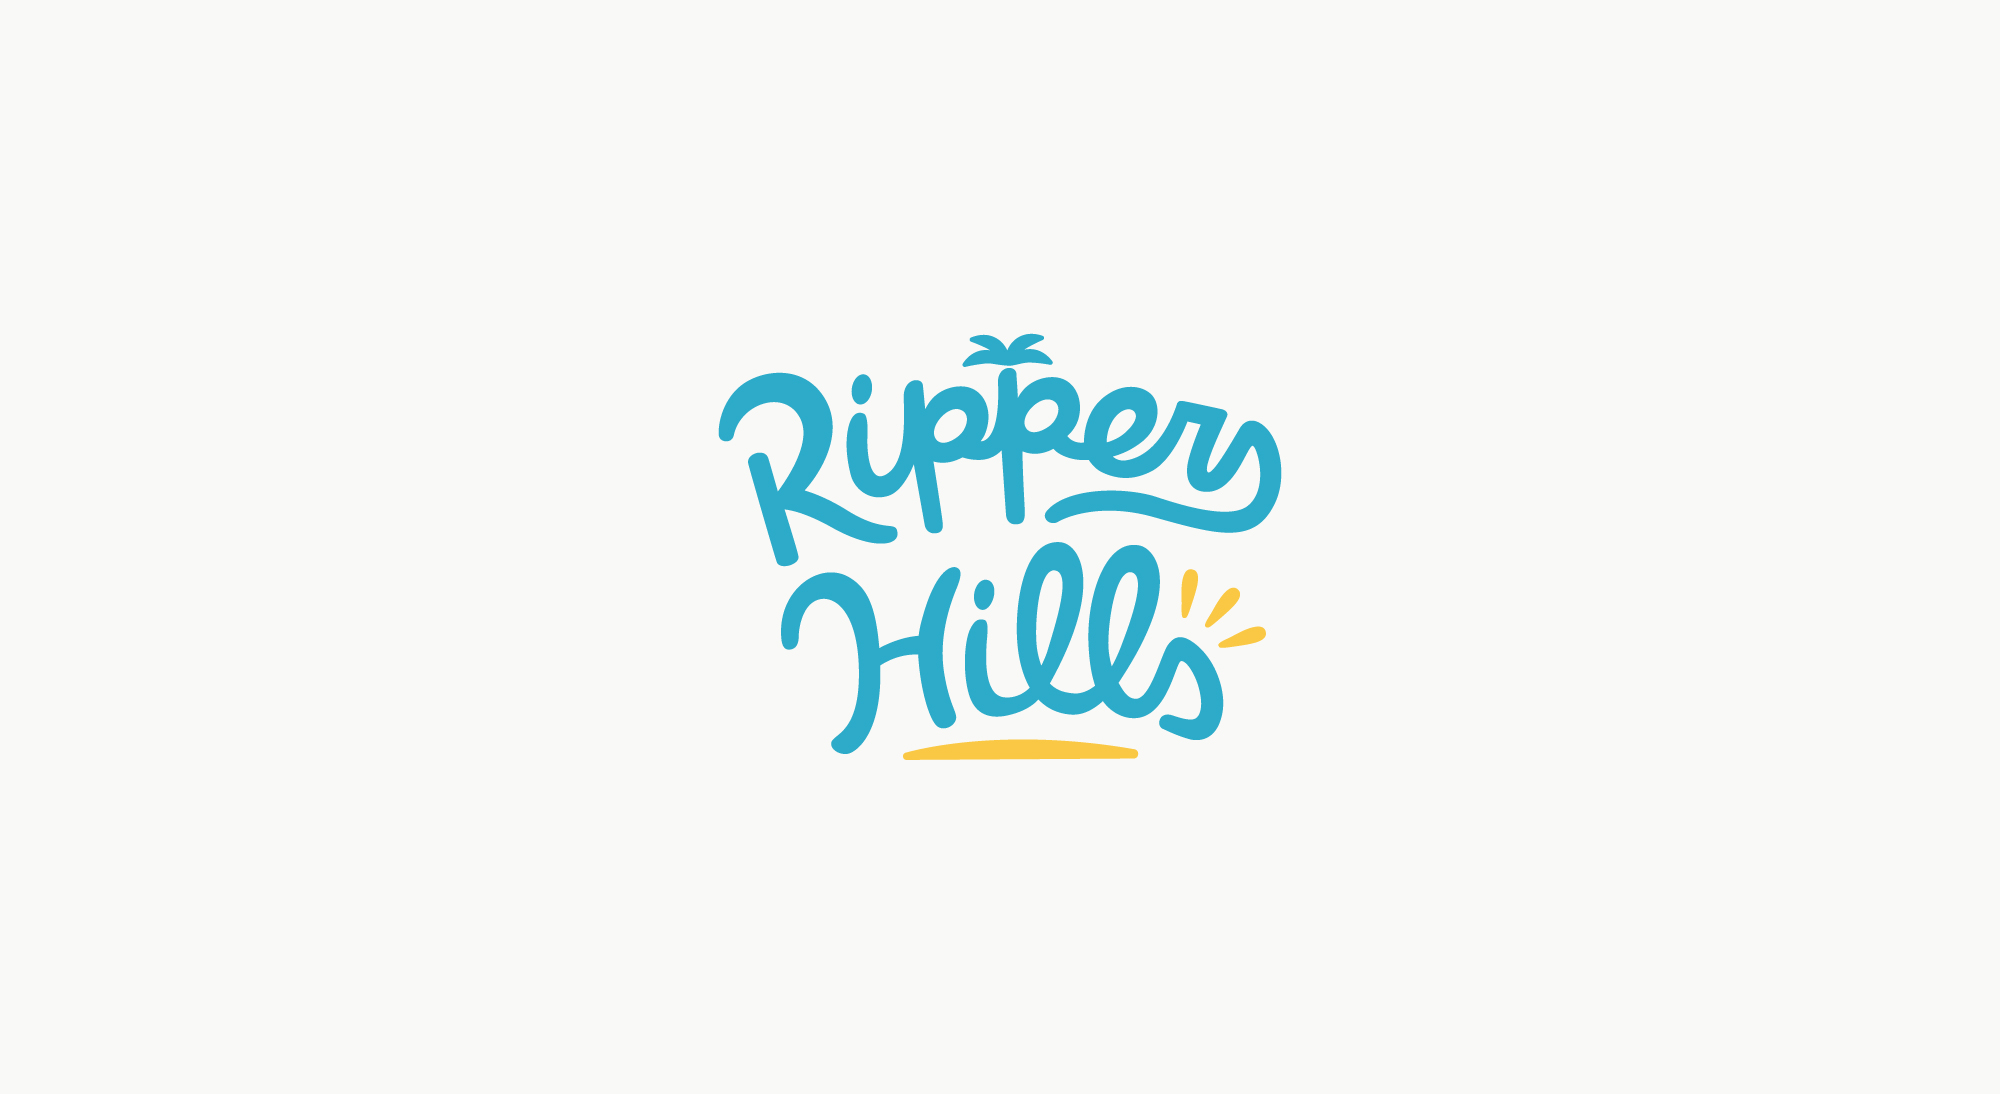 Rippers Hills – レオガーデン